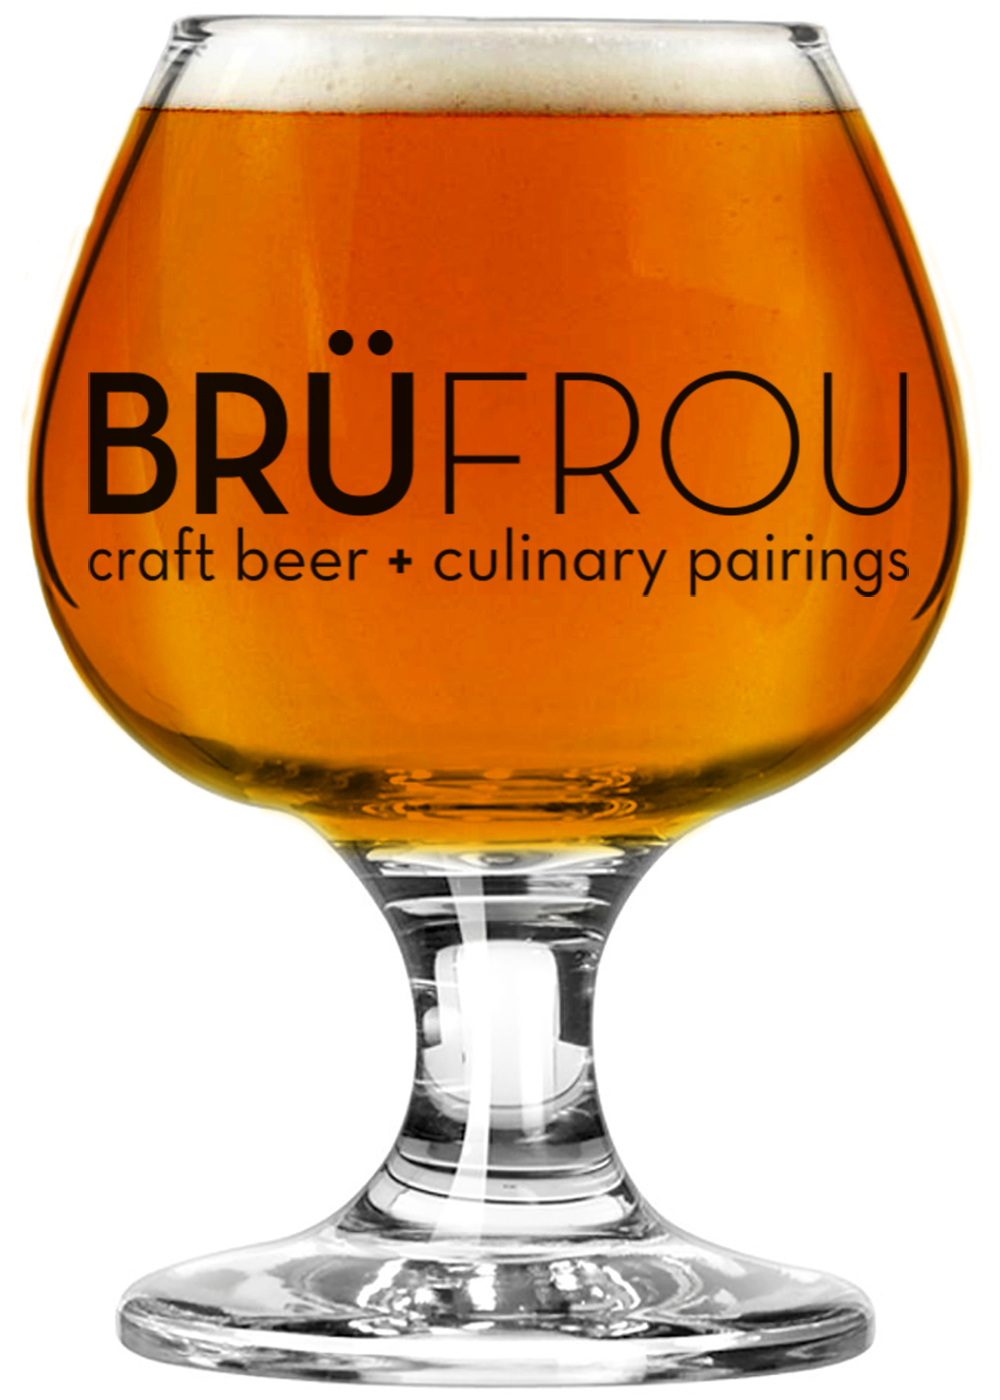 Colorado's best beer and food at the 2nd Annual BruFrou